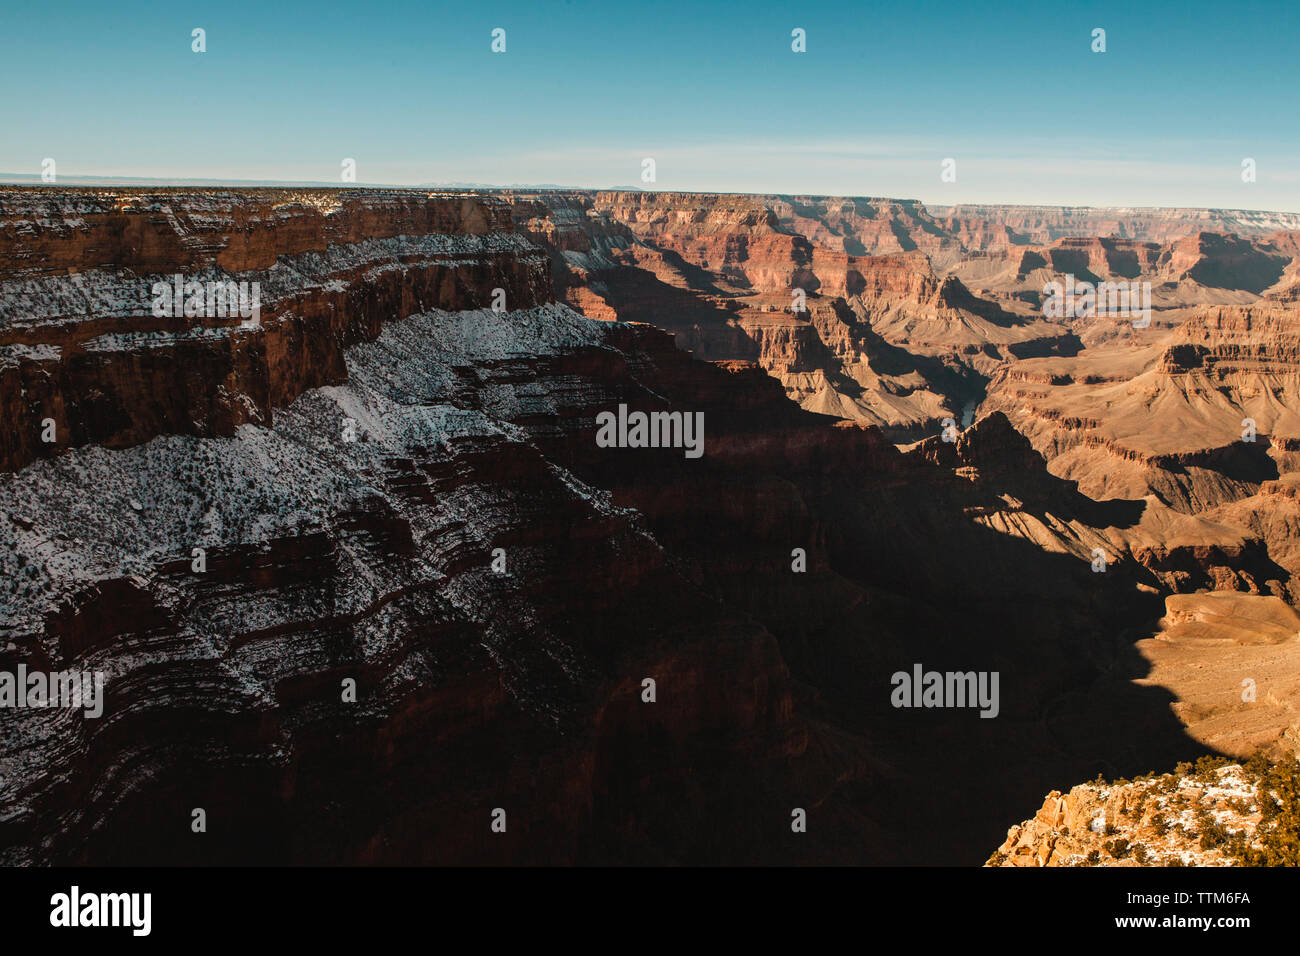 High angle view of rock formations à Grand Canyon National Park against sky Banque D'Images